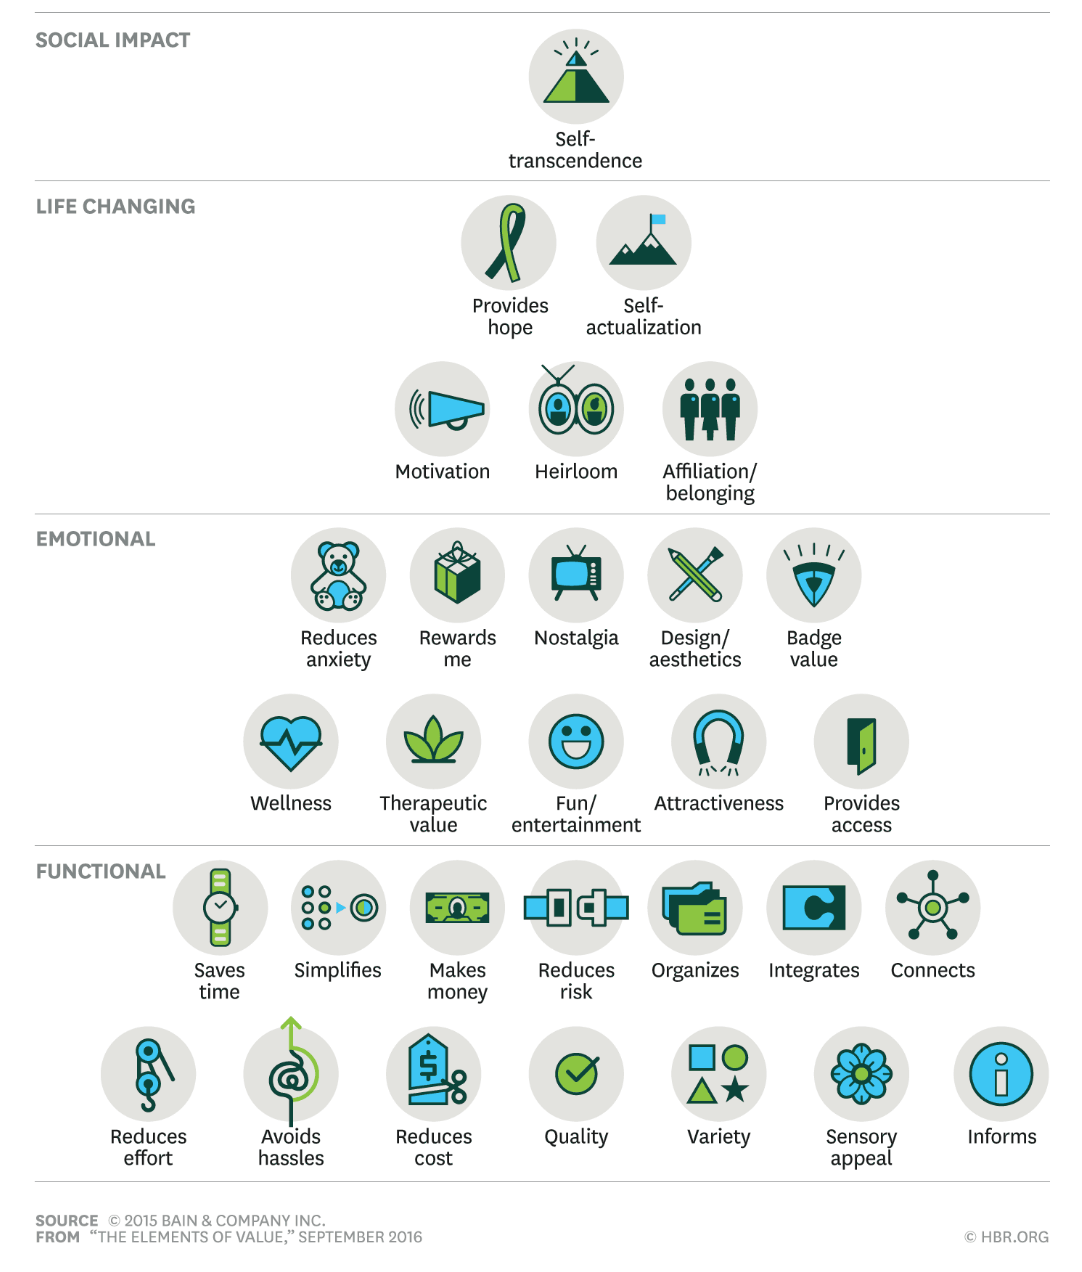 A pyramid hierarchy of patient values for MovementX physical therapists in four tiers. From the bottom, functional, emotional, life changing, and social impact.